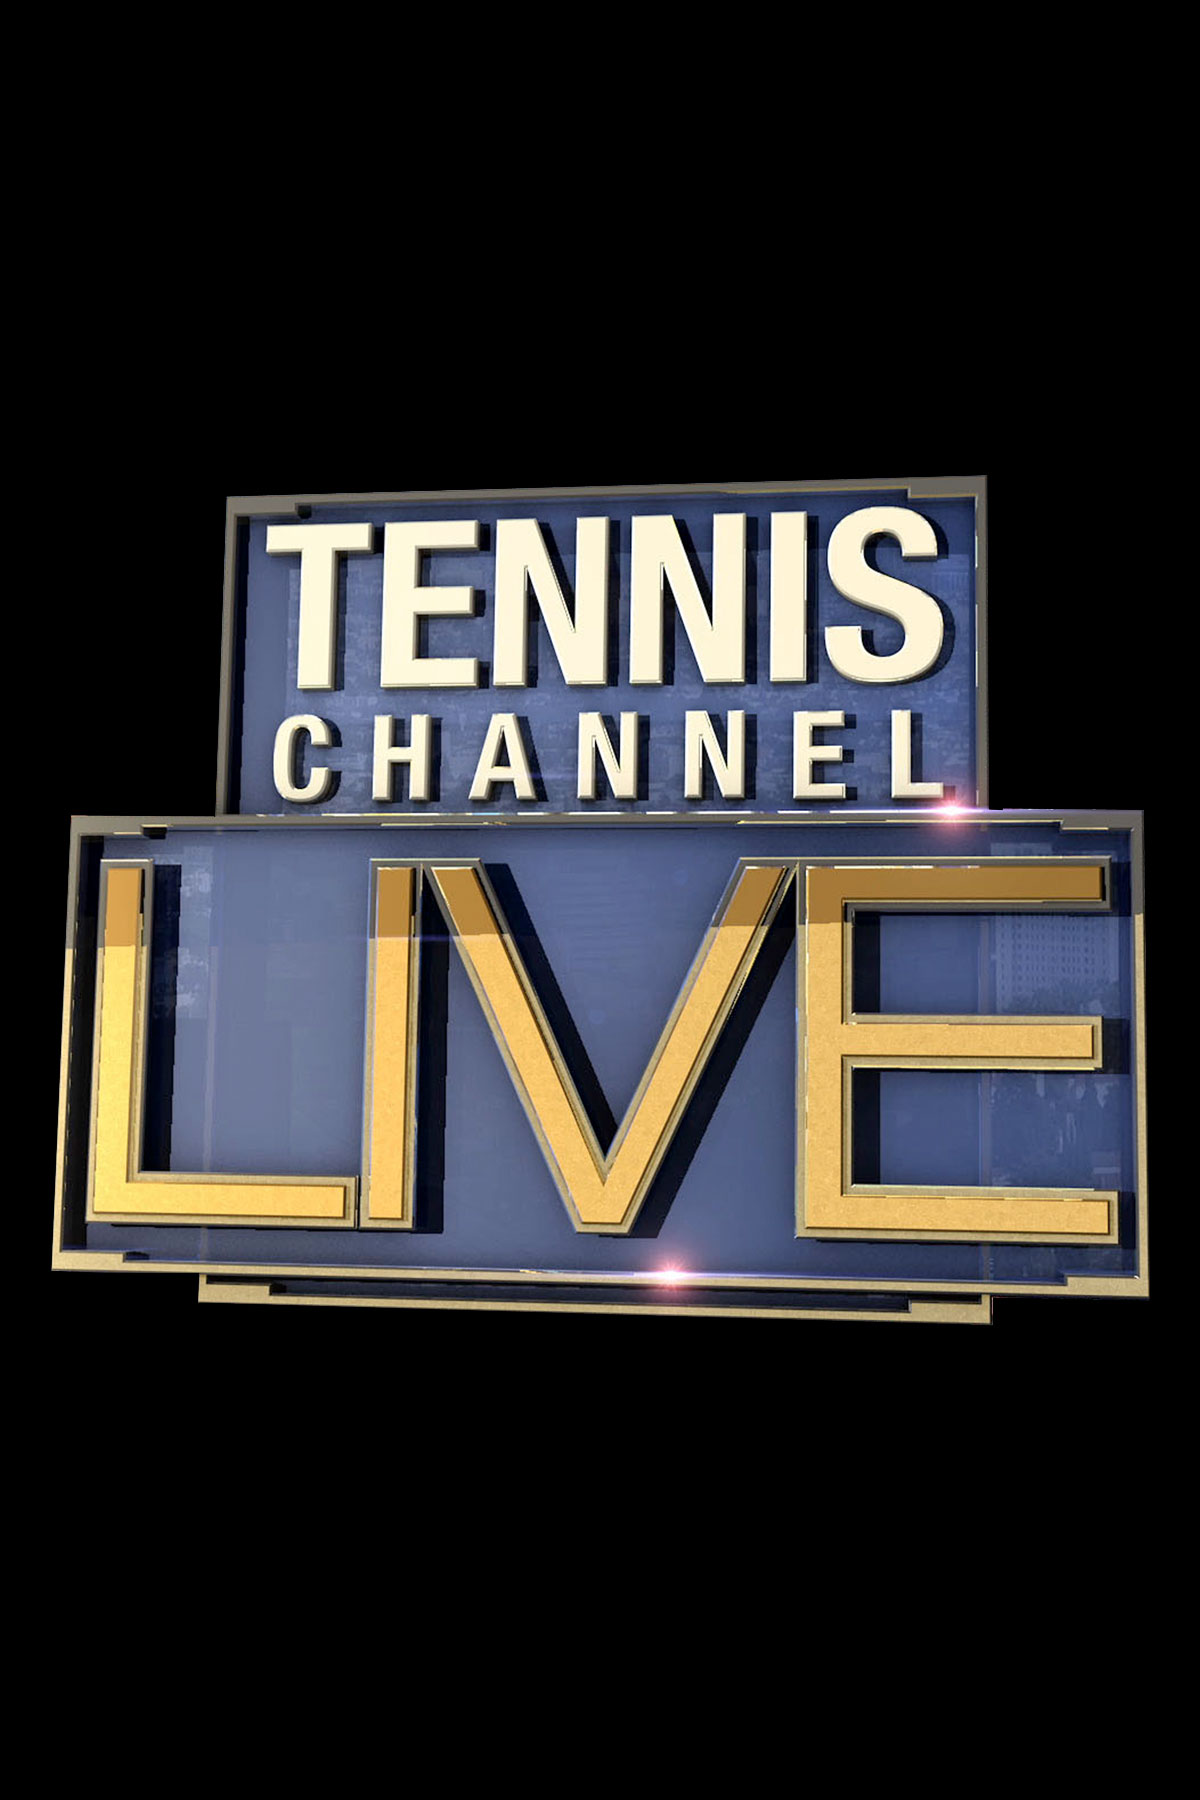 Tennis Channel Live - Full Cast and Crew